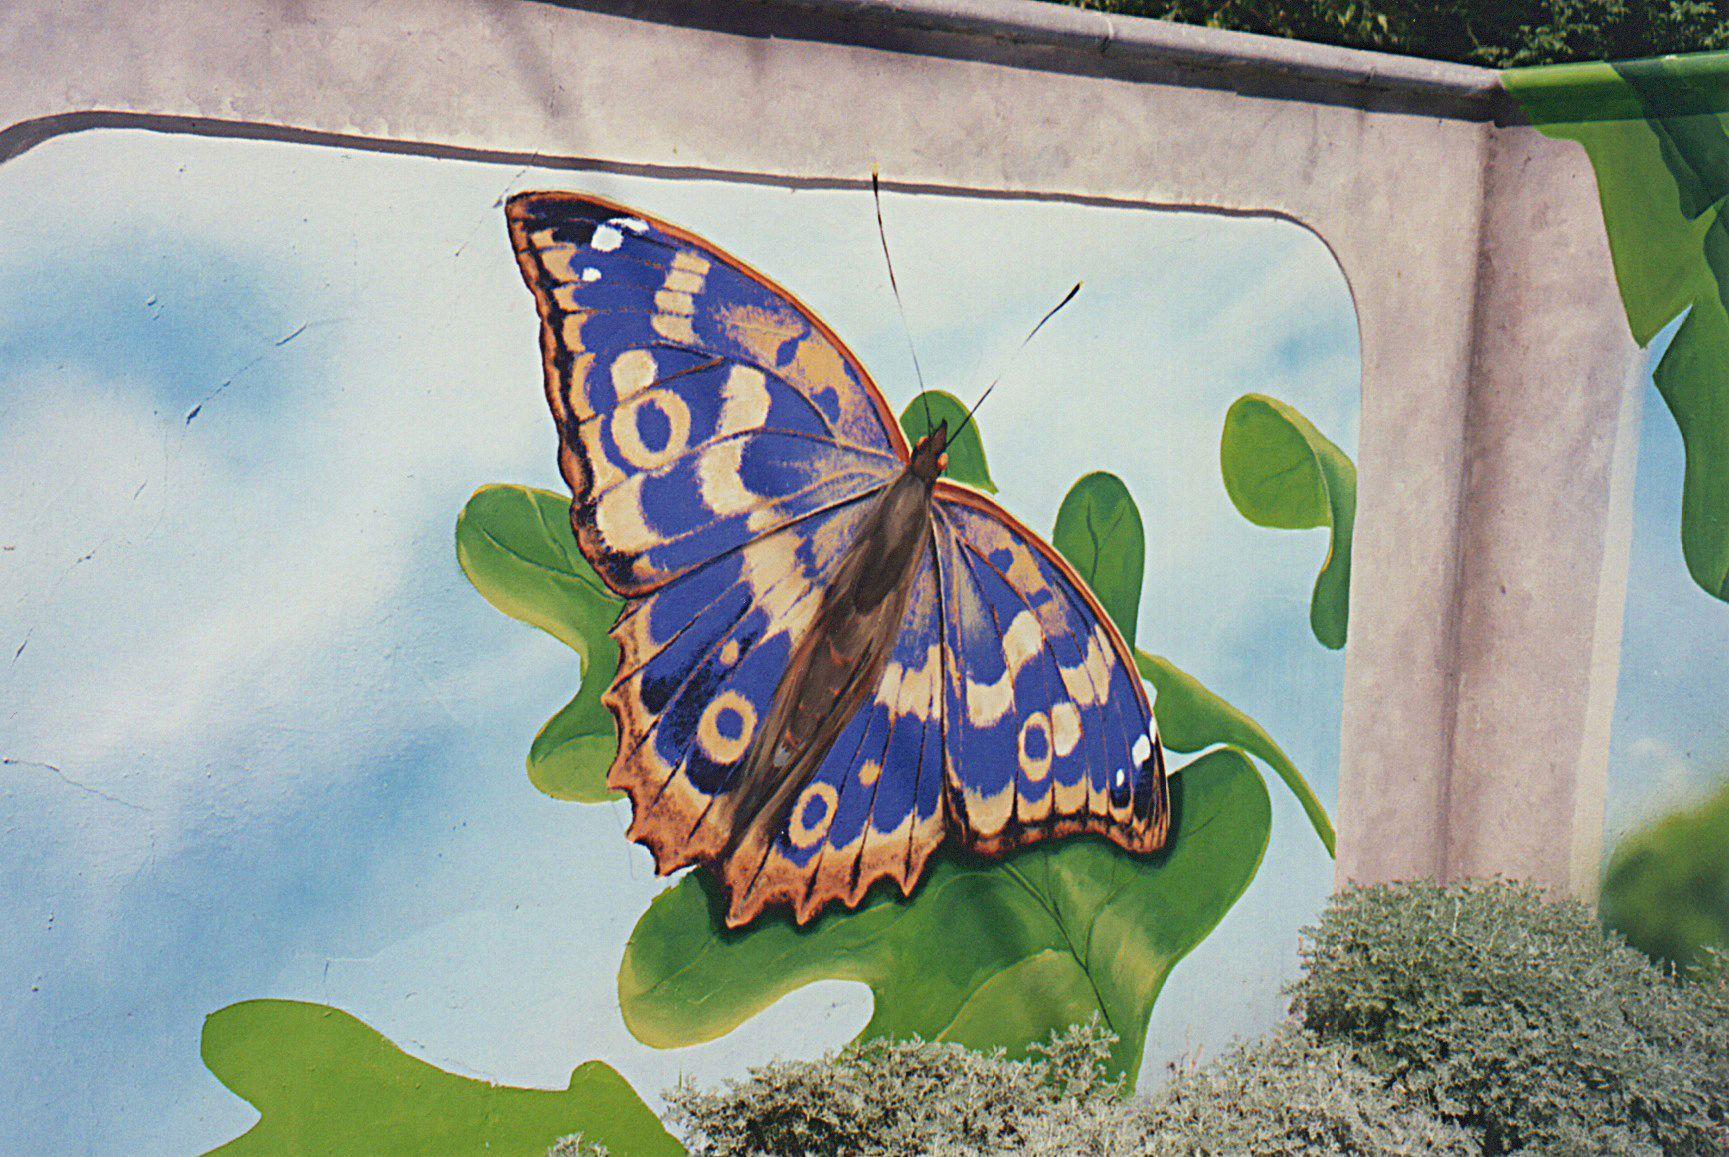 Butterfly Gas Station Logo - Gas station mural of a violet and tan butterfly, Lake Balboa